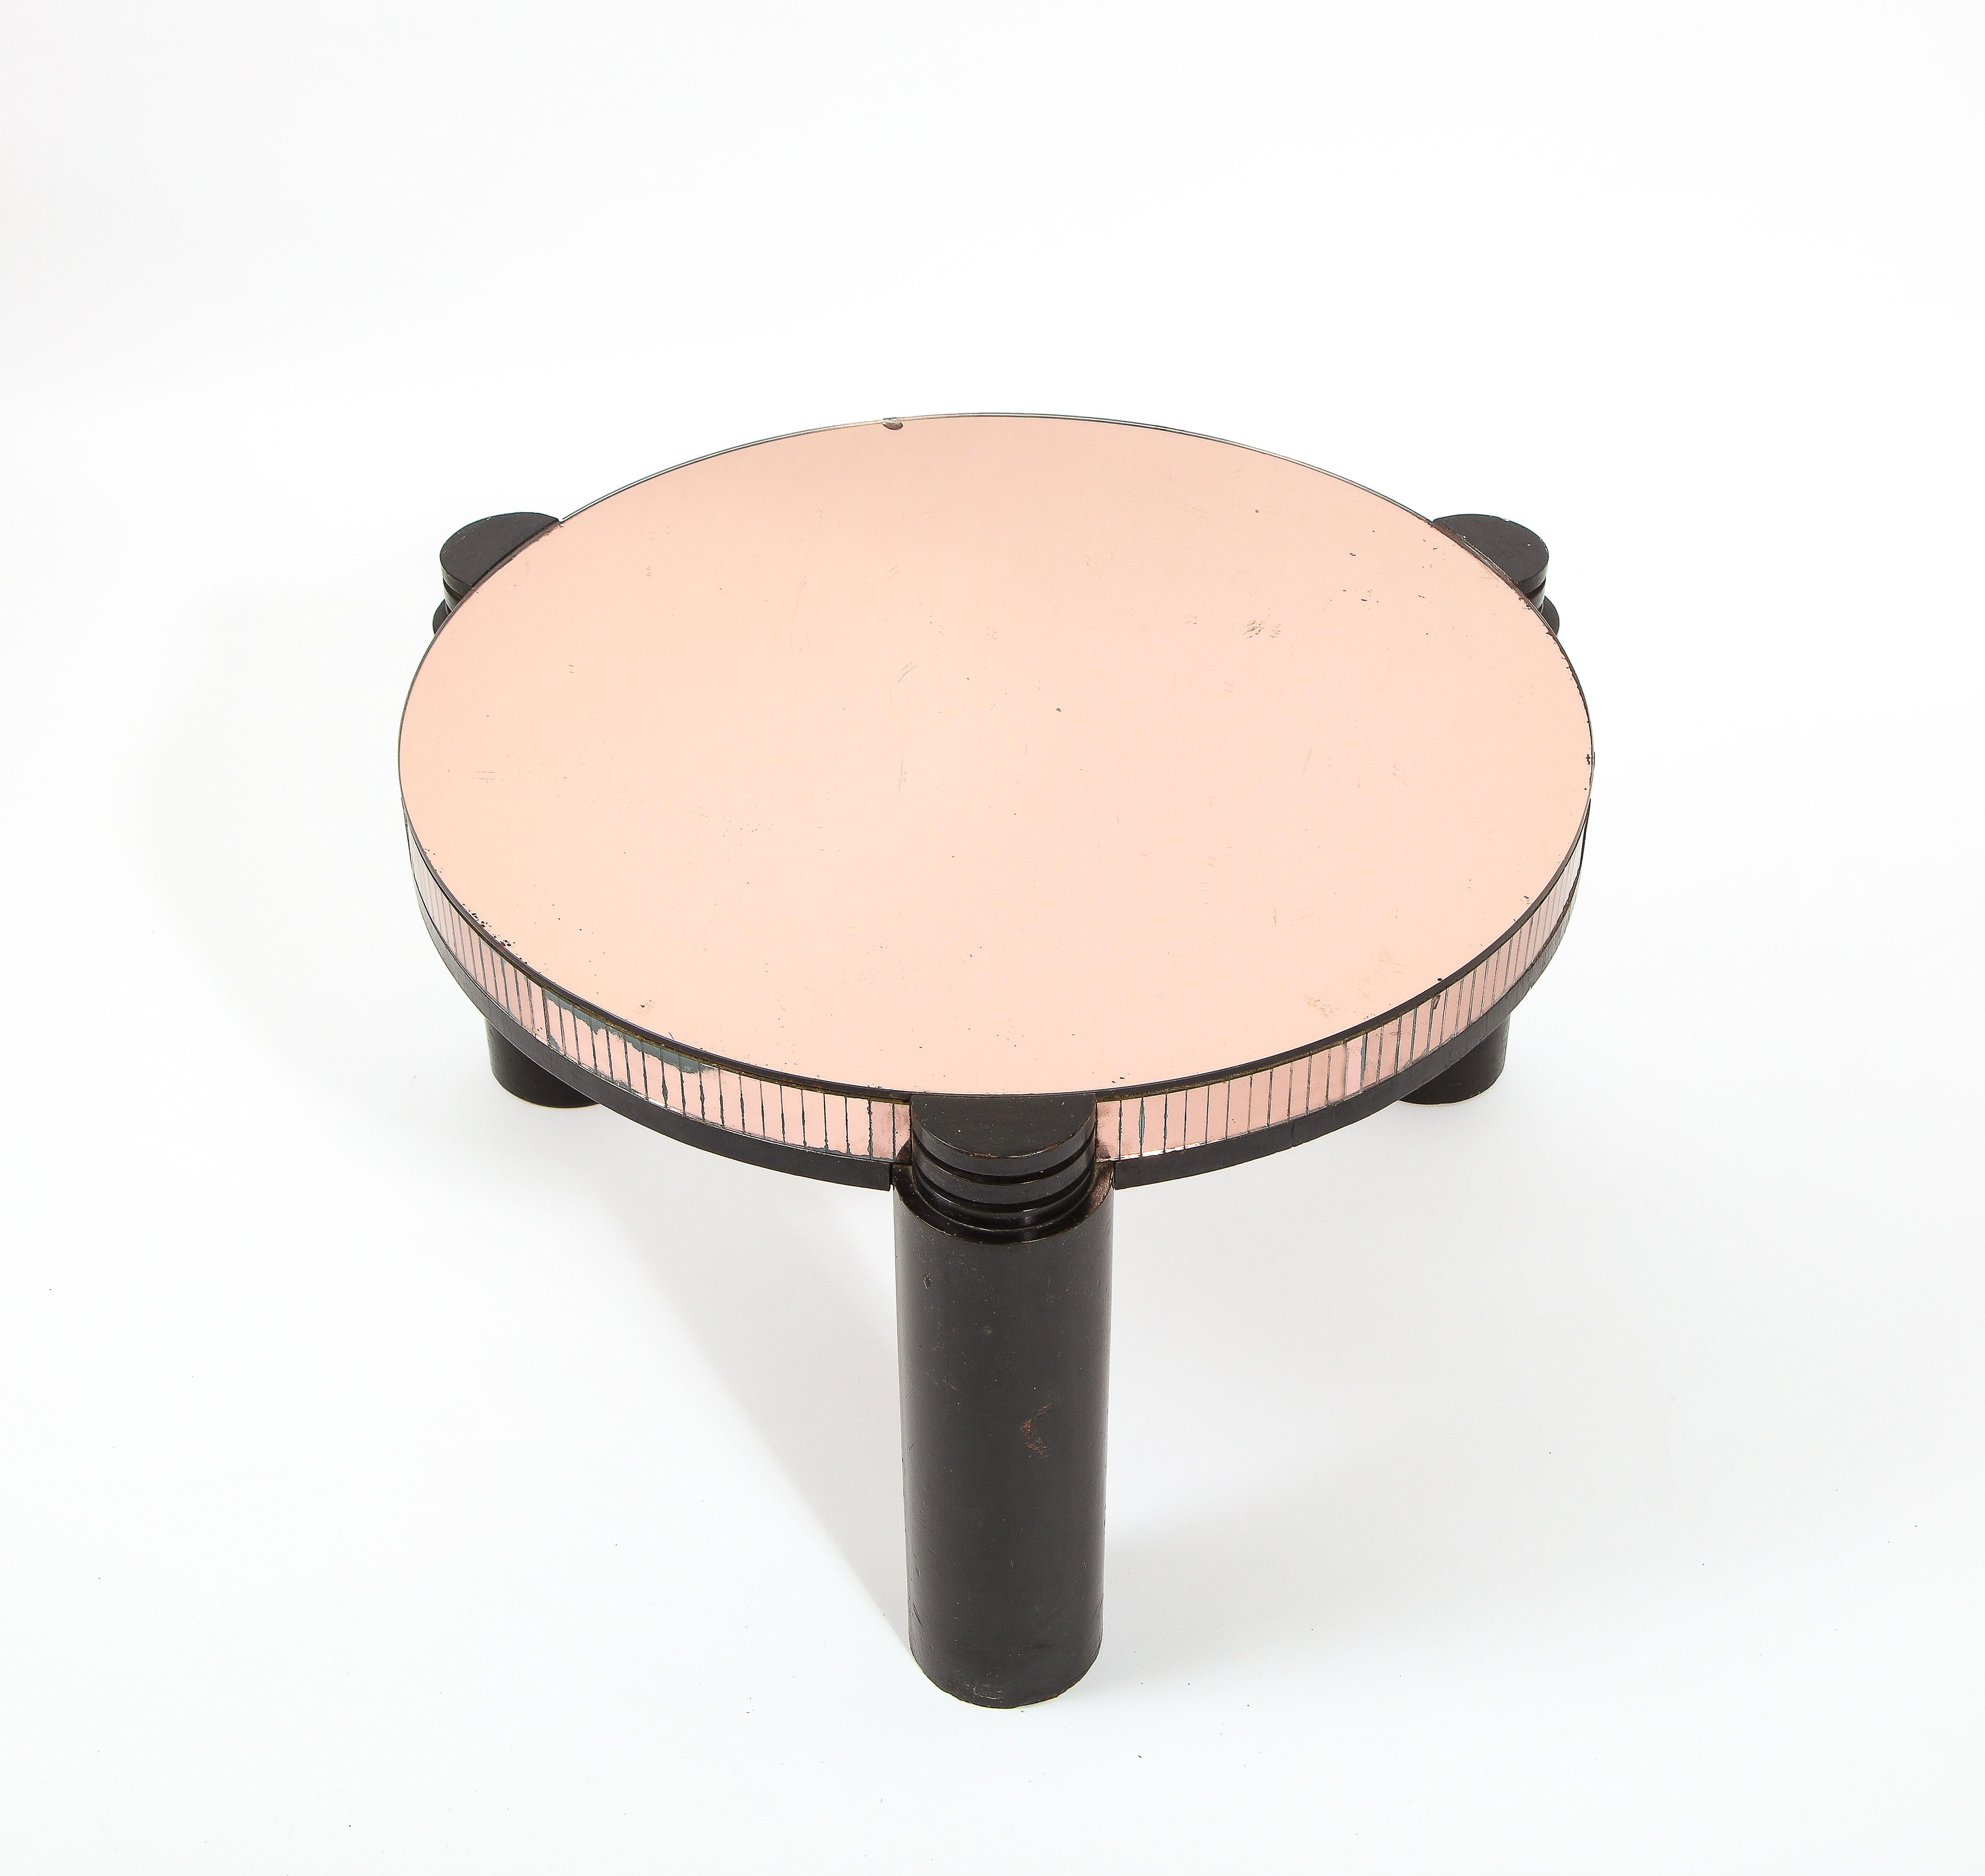 French Black Ebonized & Pink Mirror Round Deco Style Cocktail Table, France 1940's For Sale